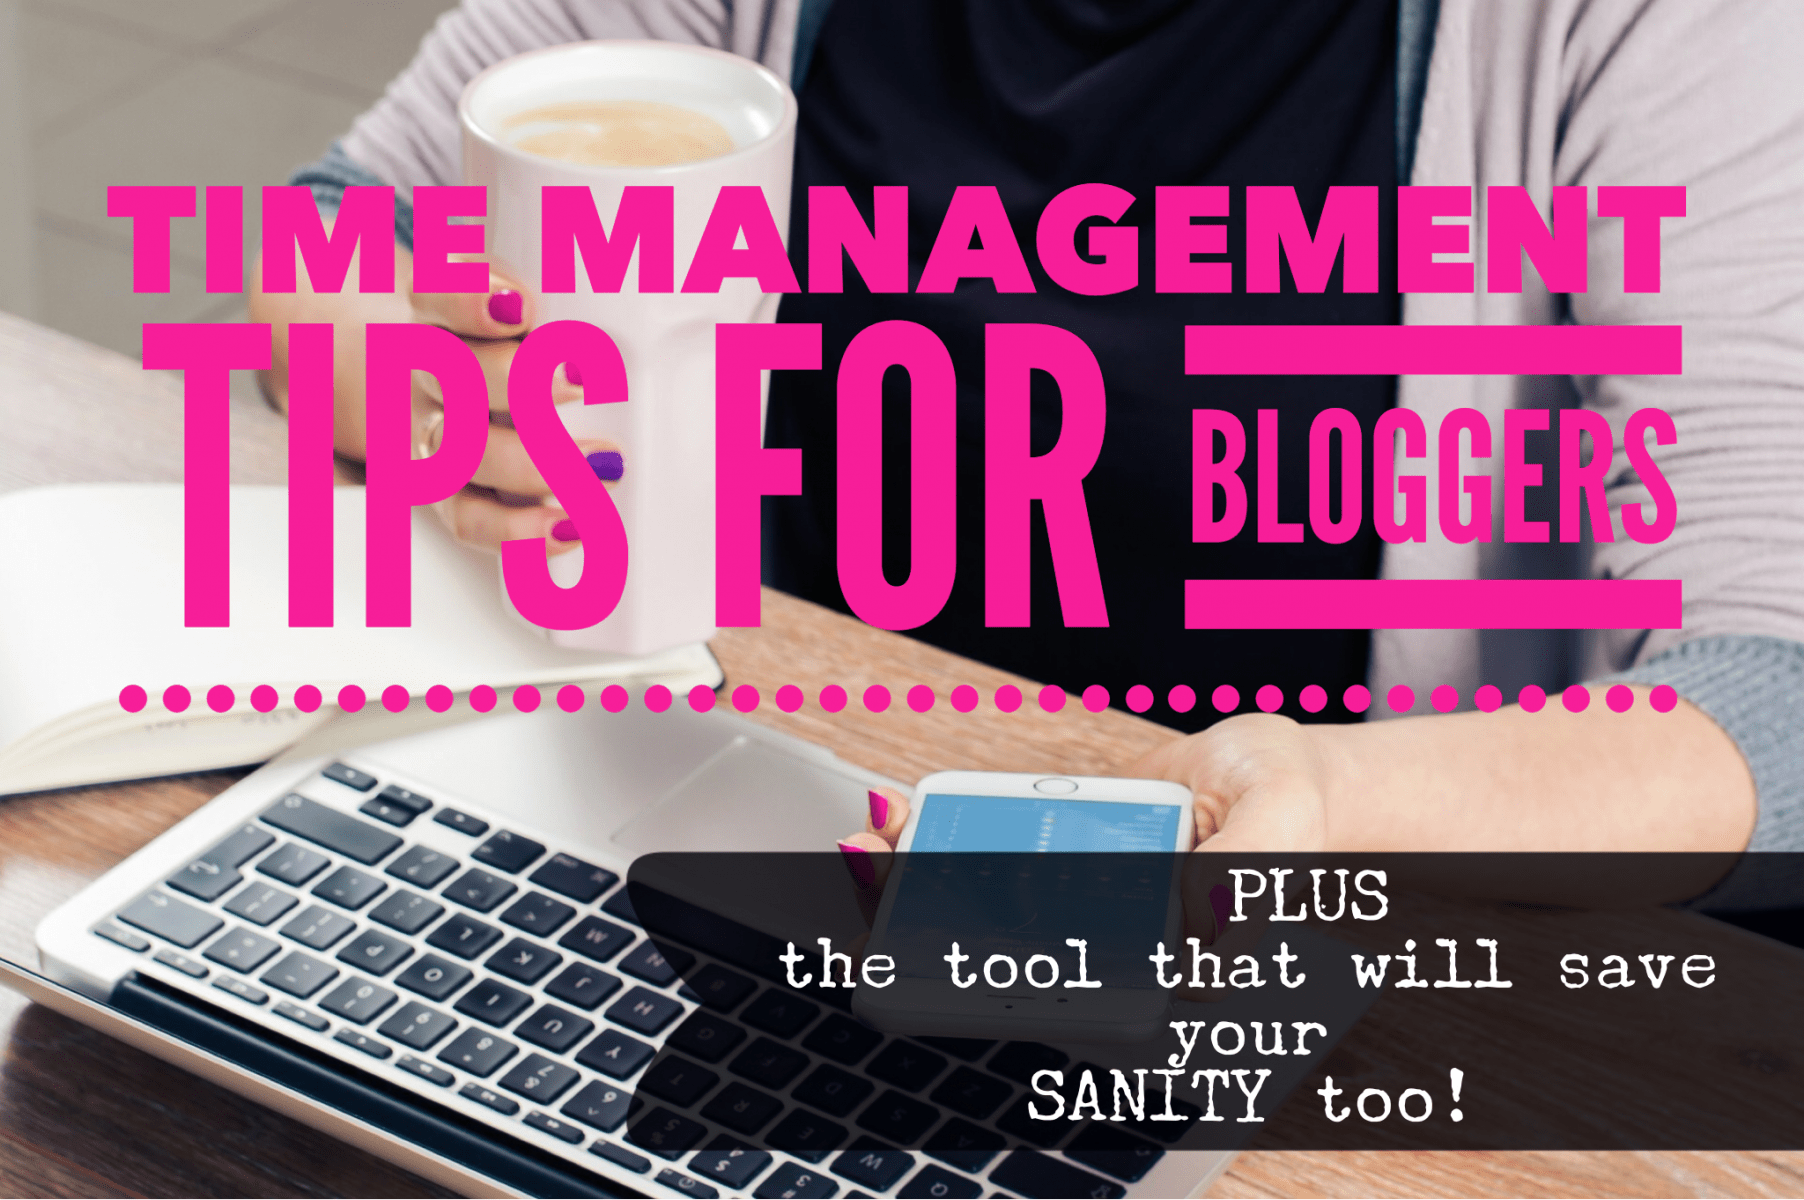 Blogging can be overwhelming. There is SO much that goes into running a successful blog besides the actual writing. Here are a few of my tips for time management and how they have helped me to grow my blog over the last few months. PLUS, my FAVORITE time-saving tool that saves my sanity too!!